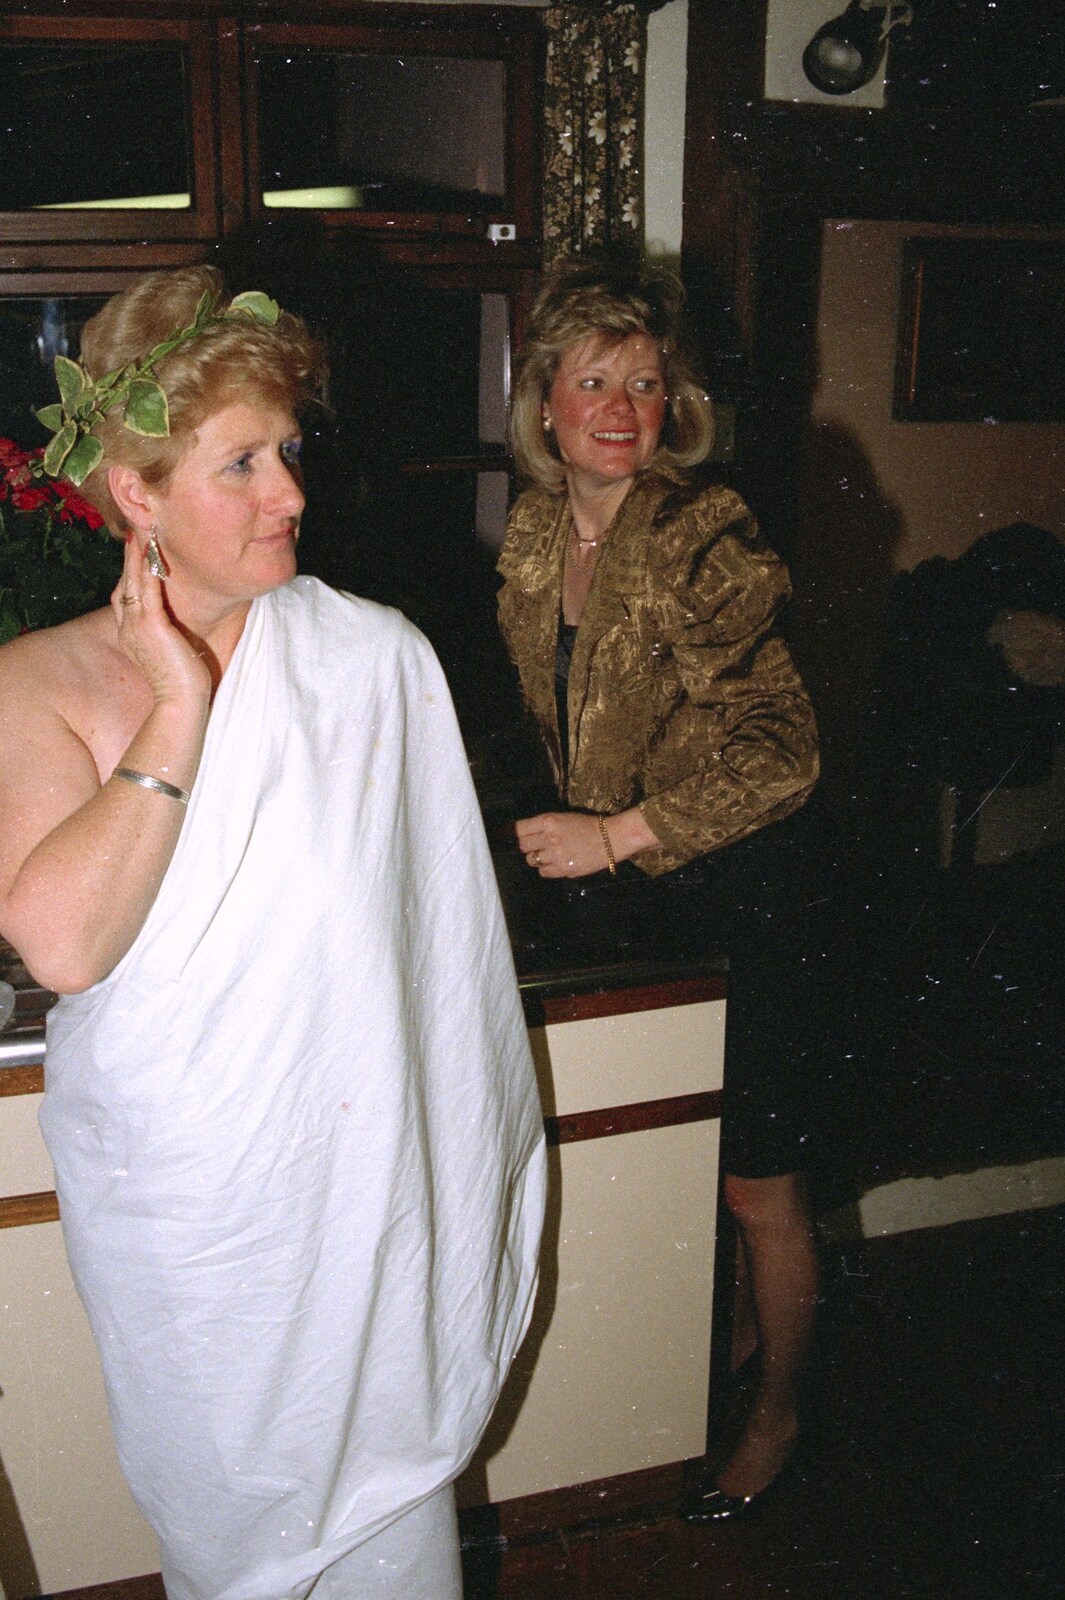 Bedsheet toga from Geoff and Brenda's Pre-Christmas Toga Party, Stuston, Suffolk - 17th December 1991